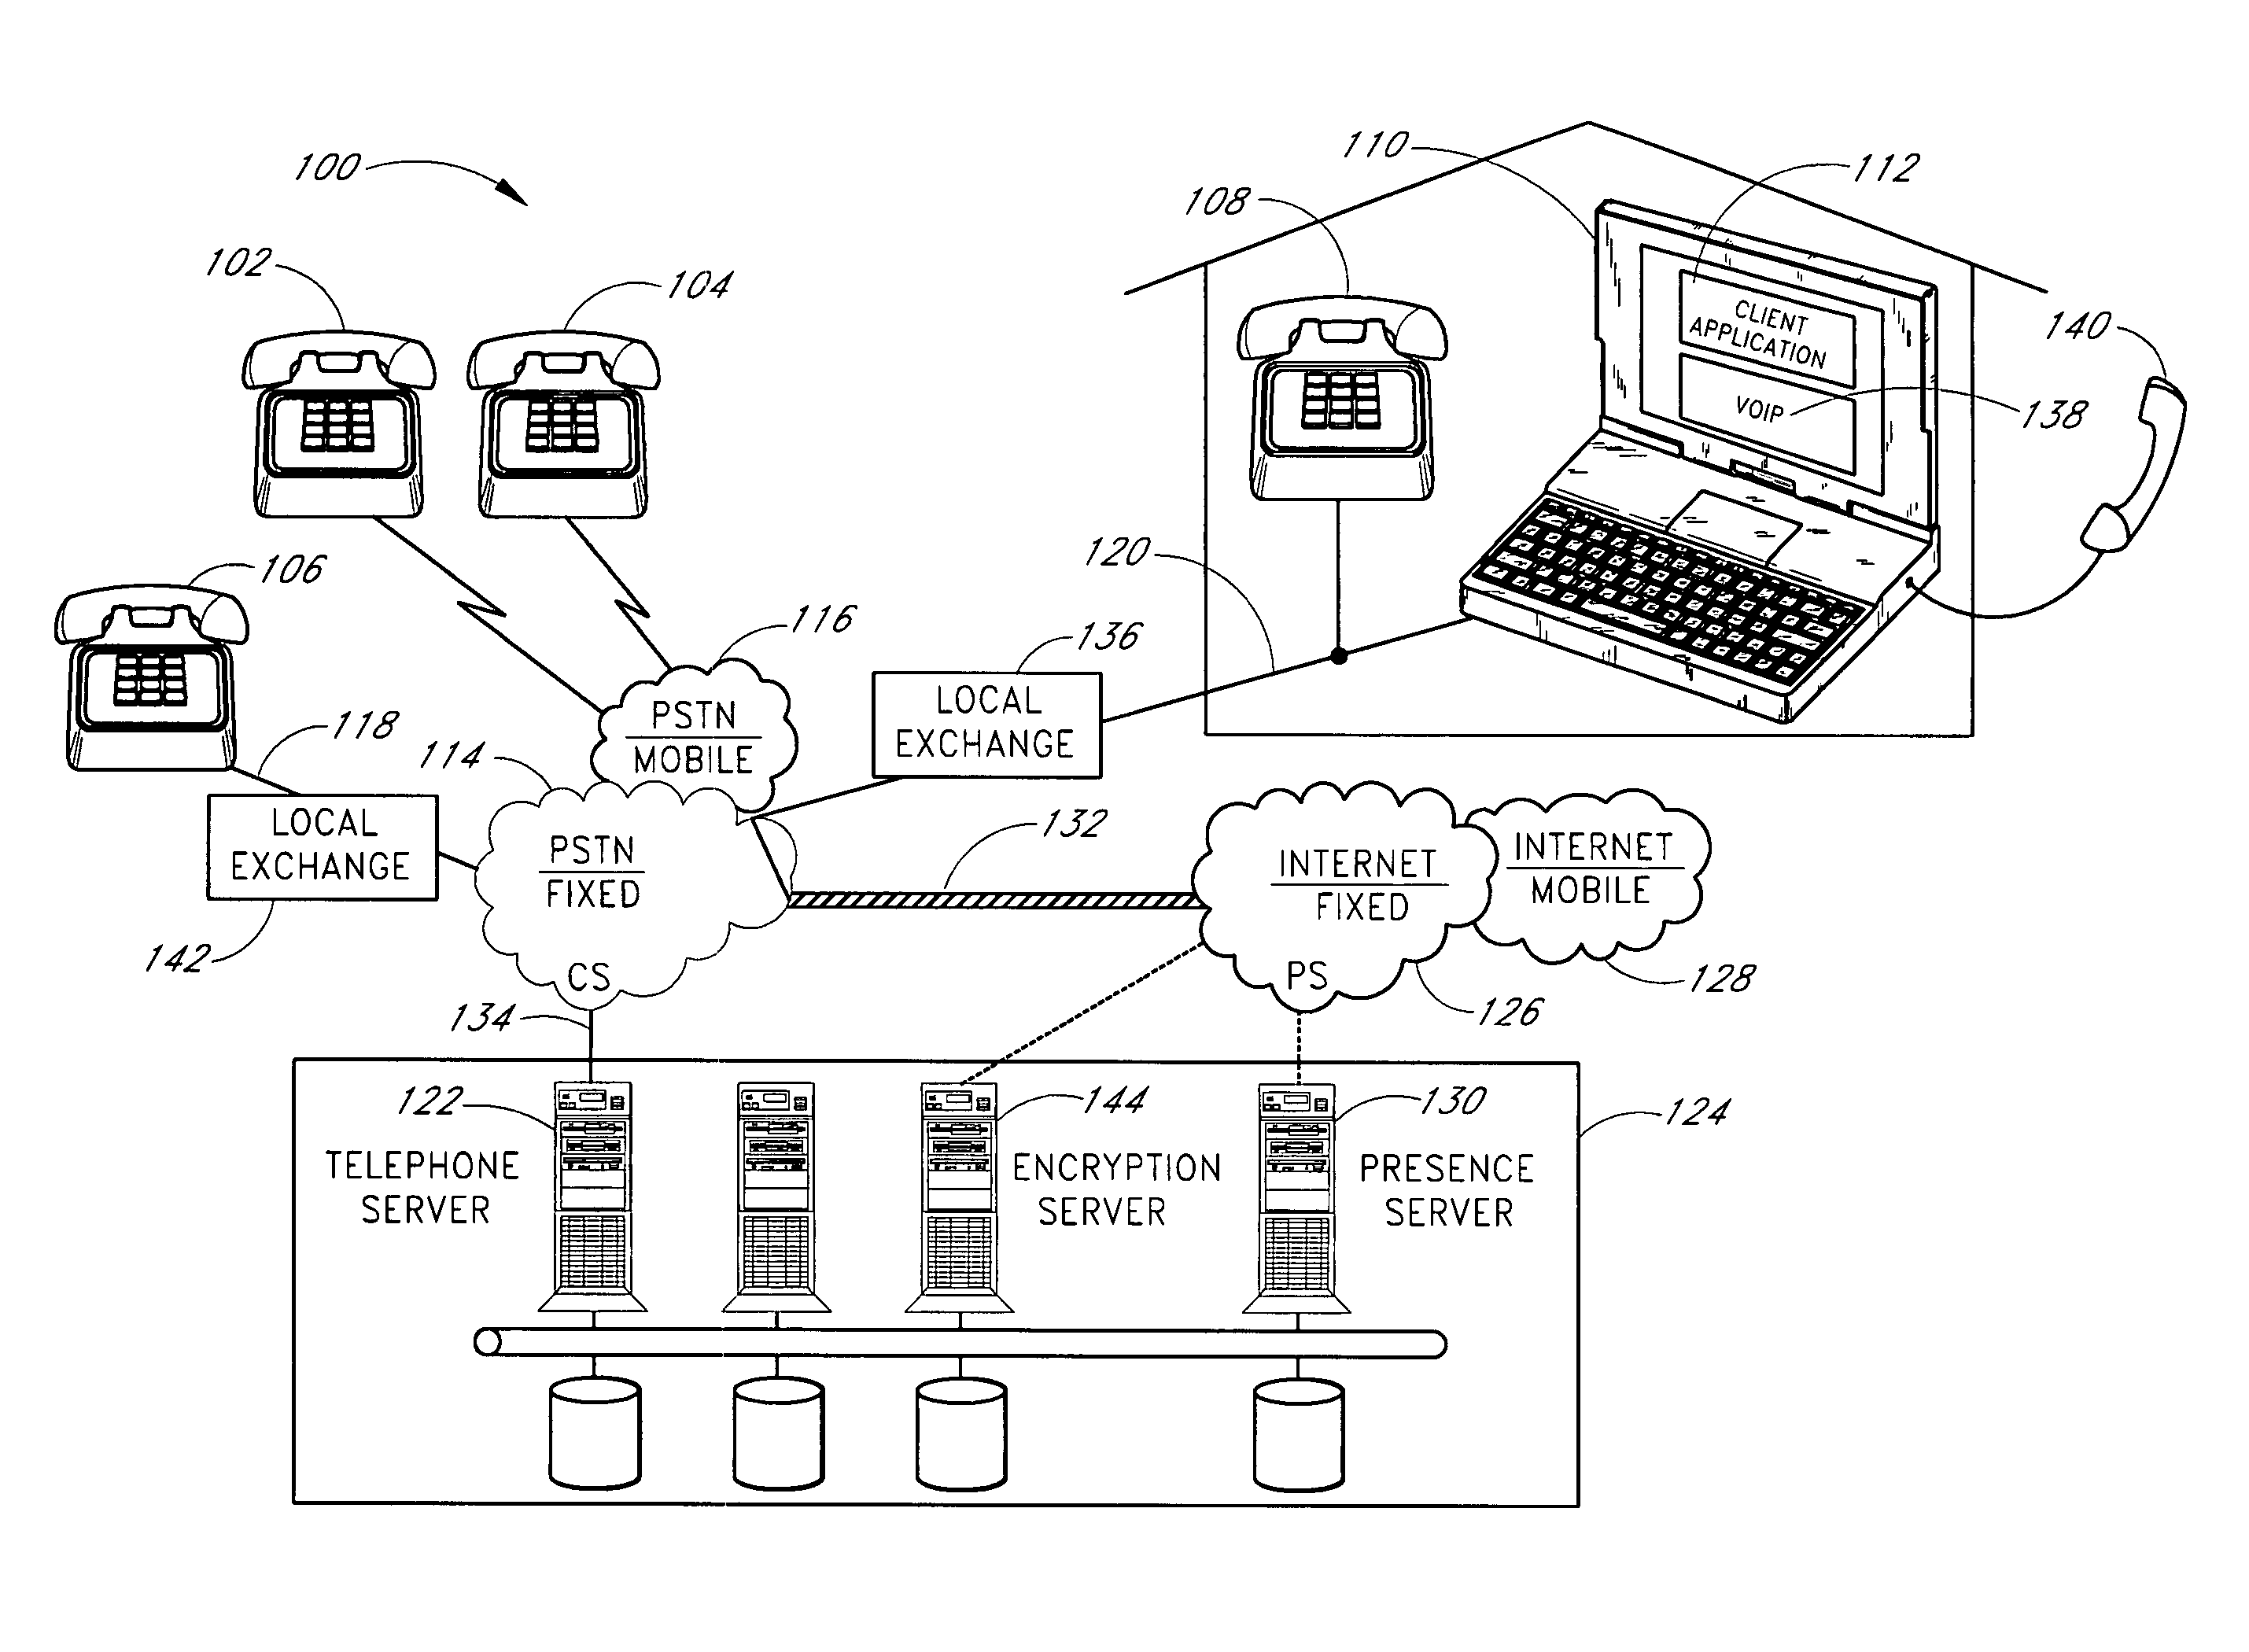 Methods and systems for creating a dynamic call log and contact records